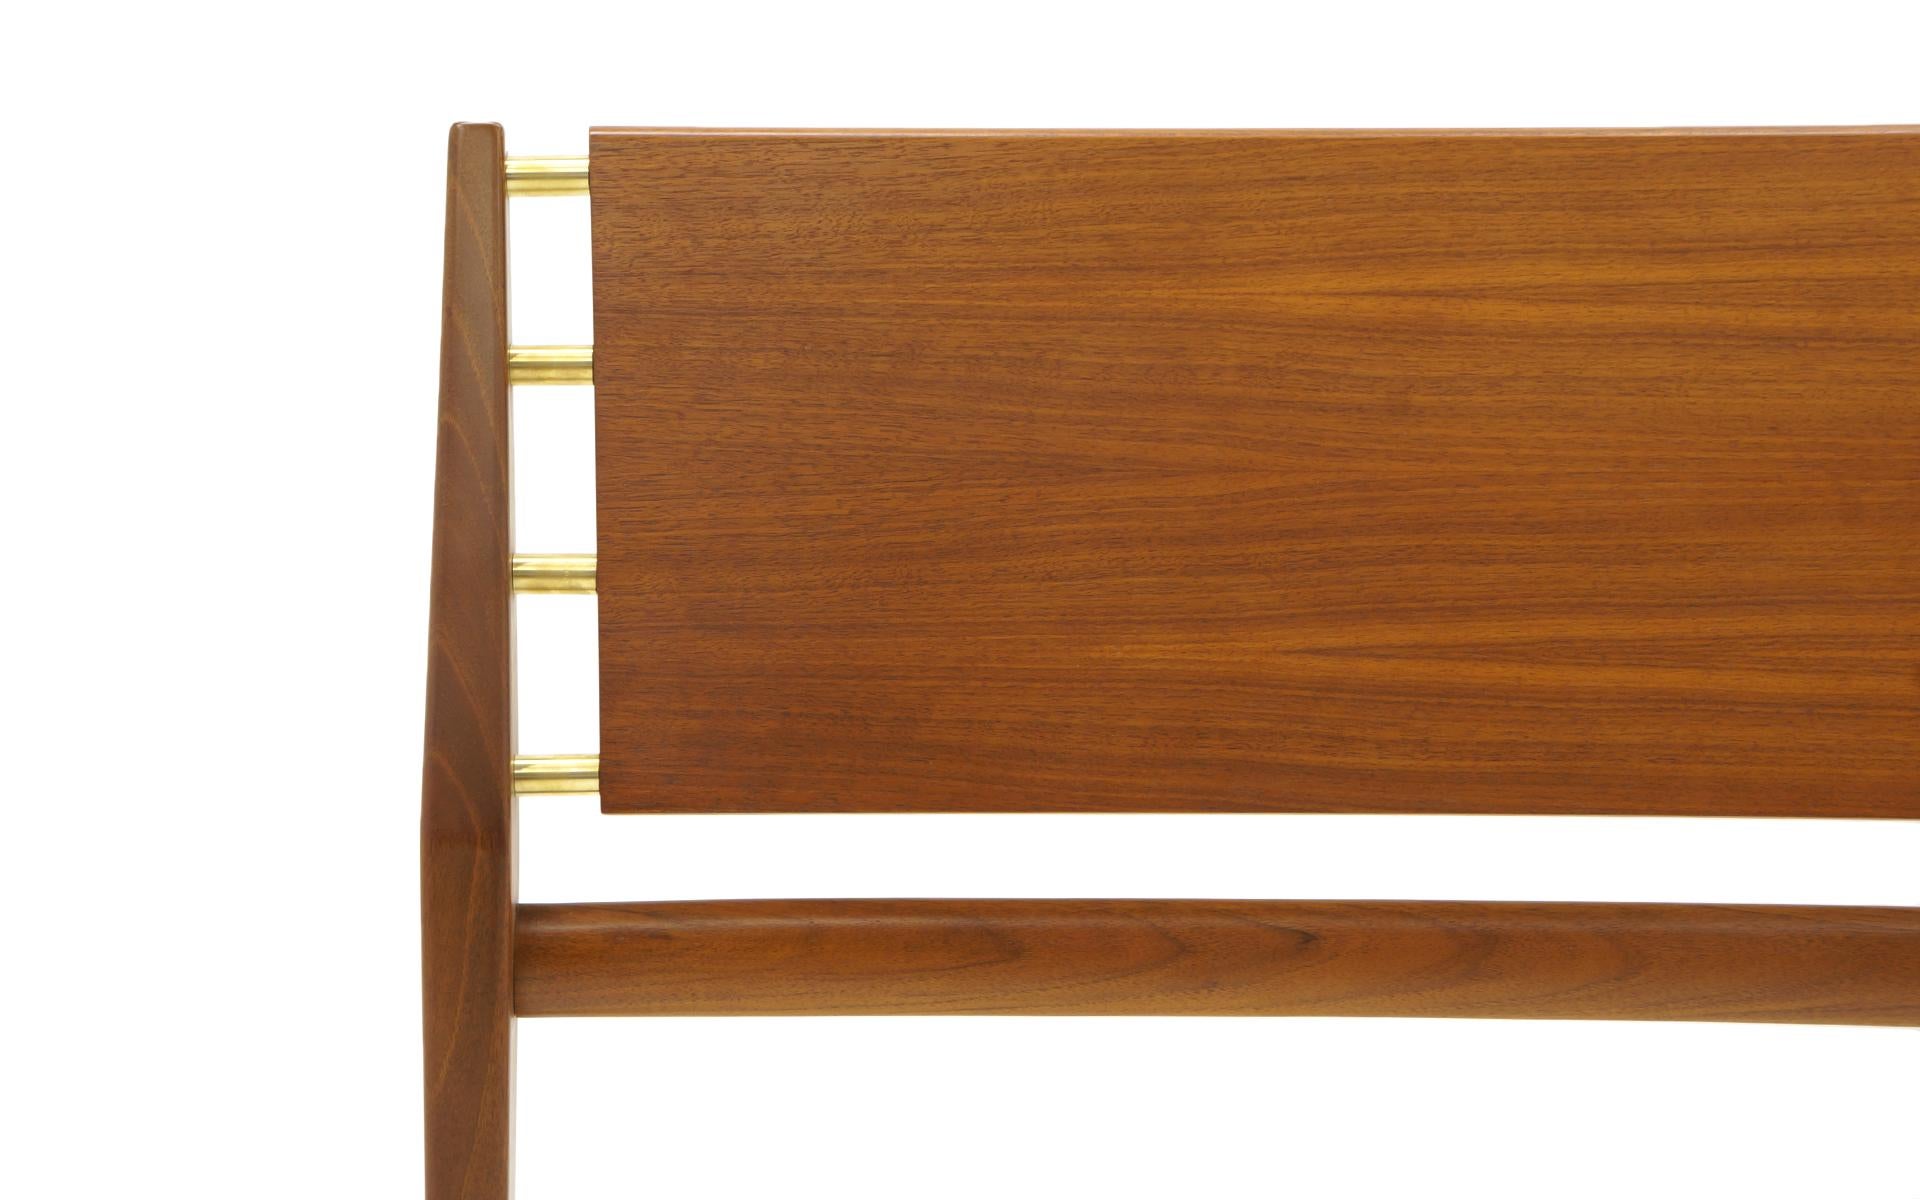 Mid-Century Modern King Sized Headboard, Walnut and Brass by Bertha Schaefer for Singer and Sons